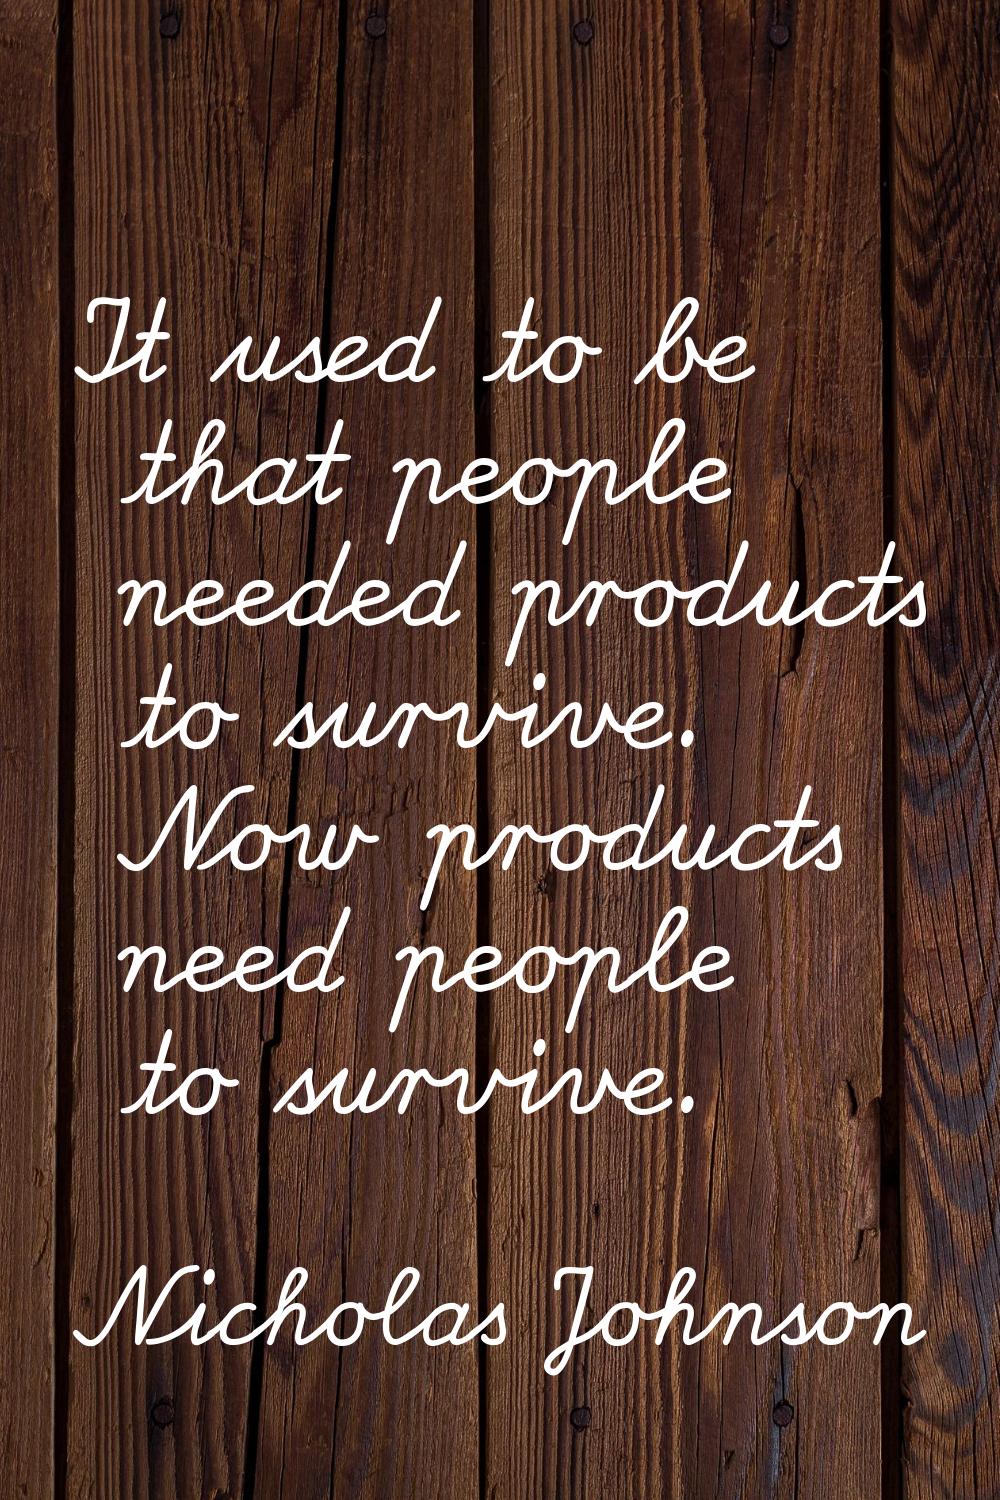 It used to be that people needed products to survive. Now products need people to survive.